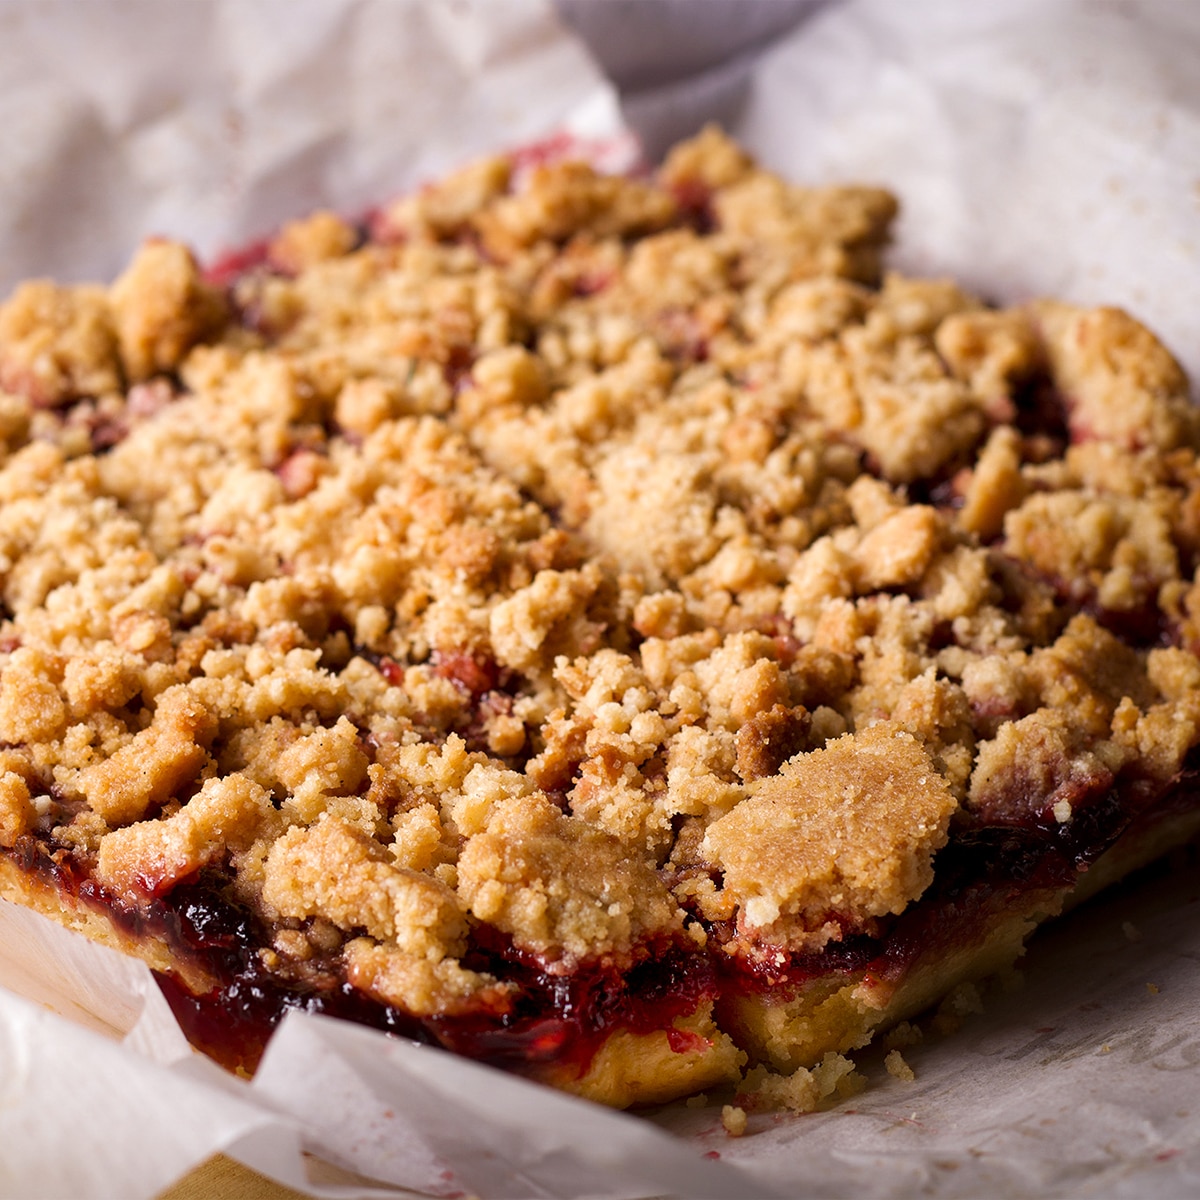 Freshly baked cherry crumble bars that have just been removed from their baking dish.